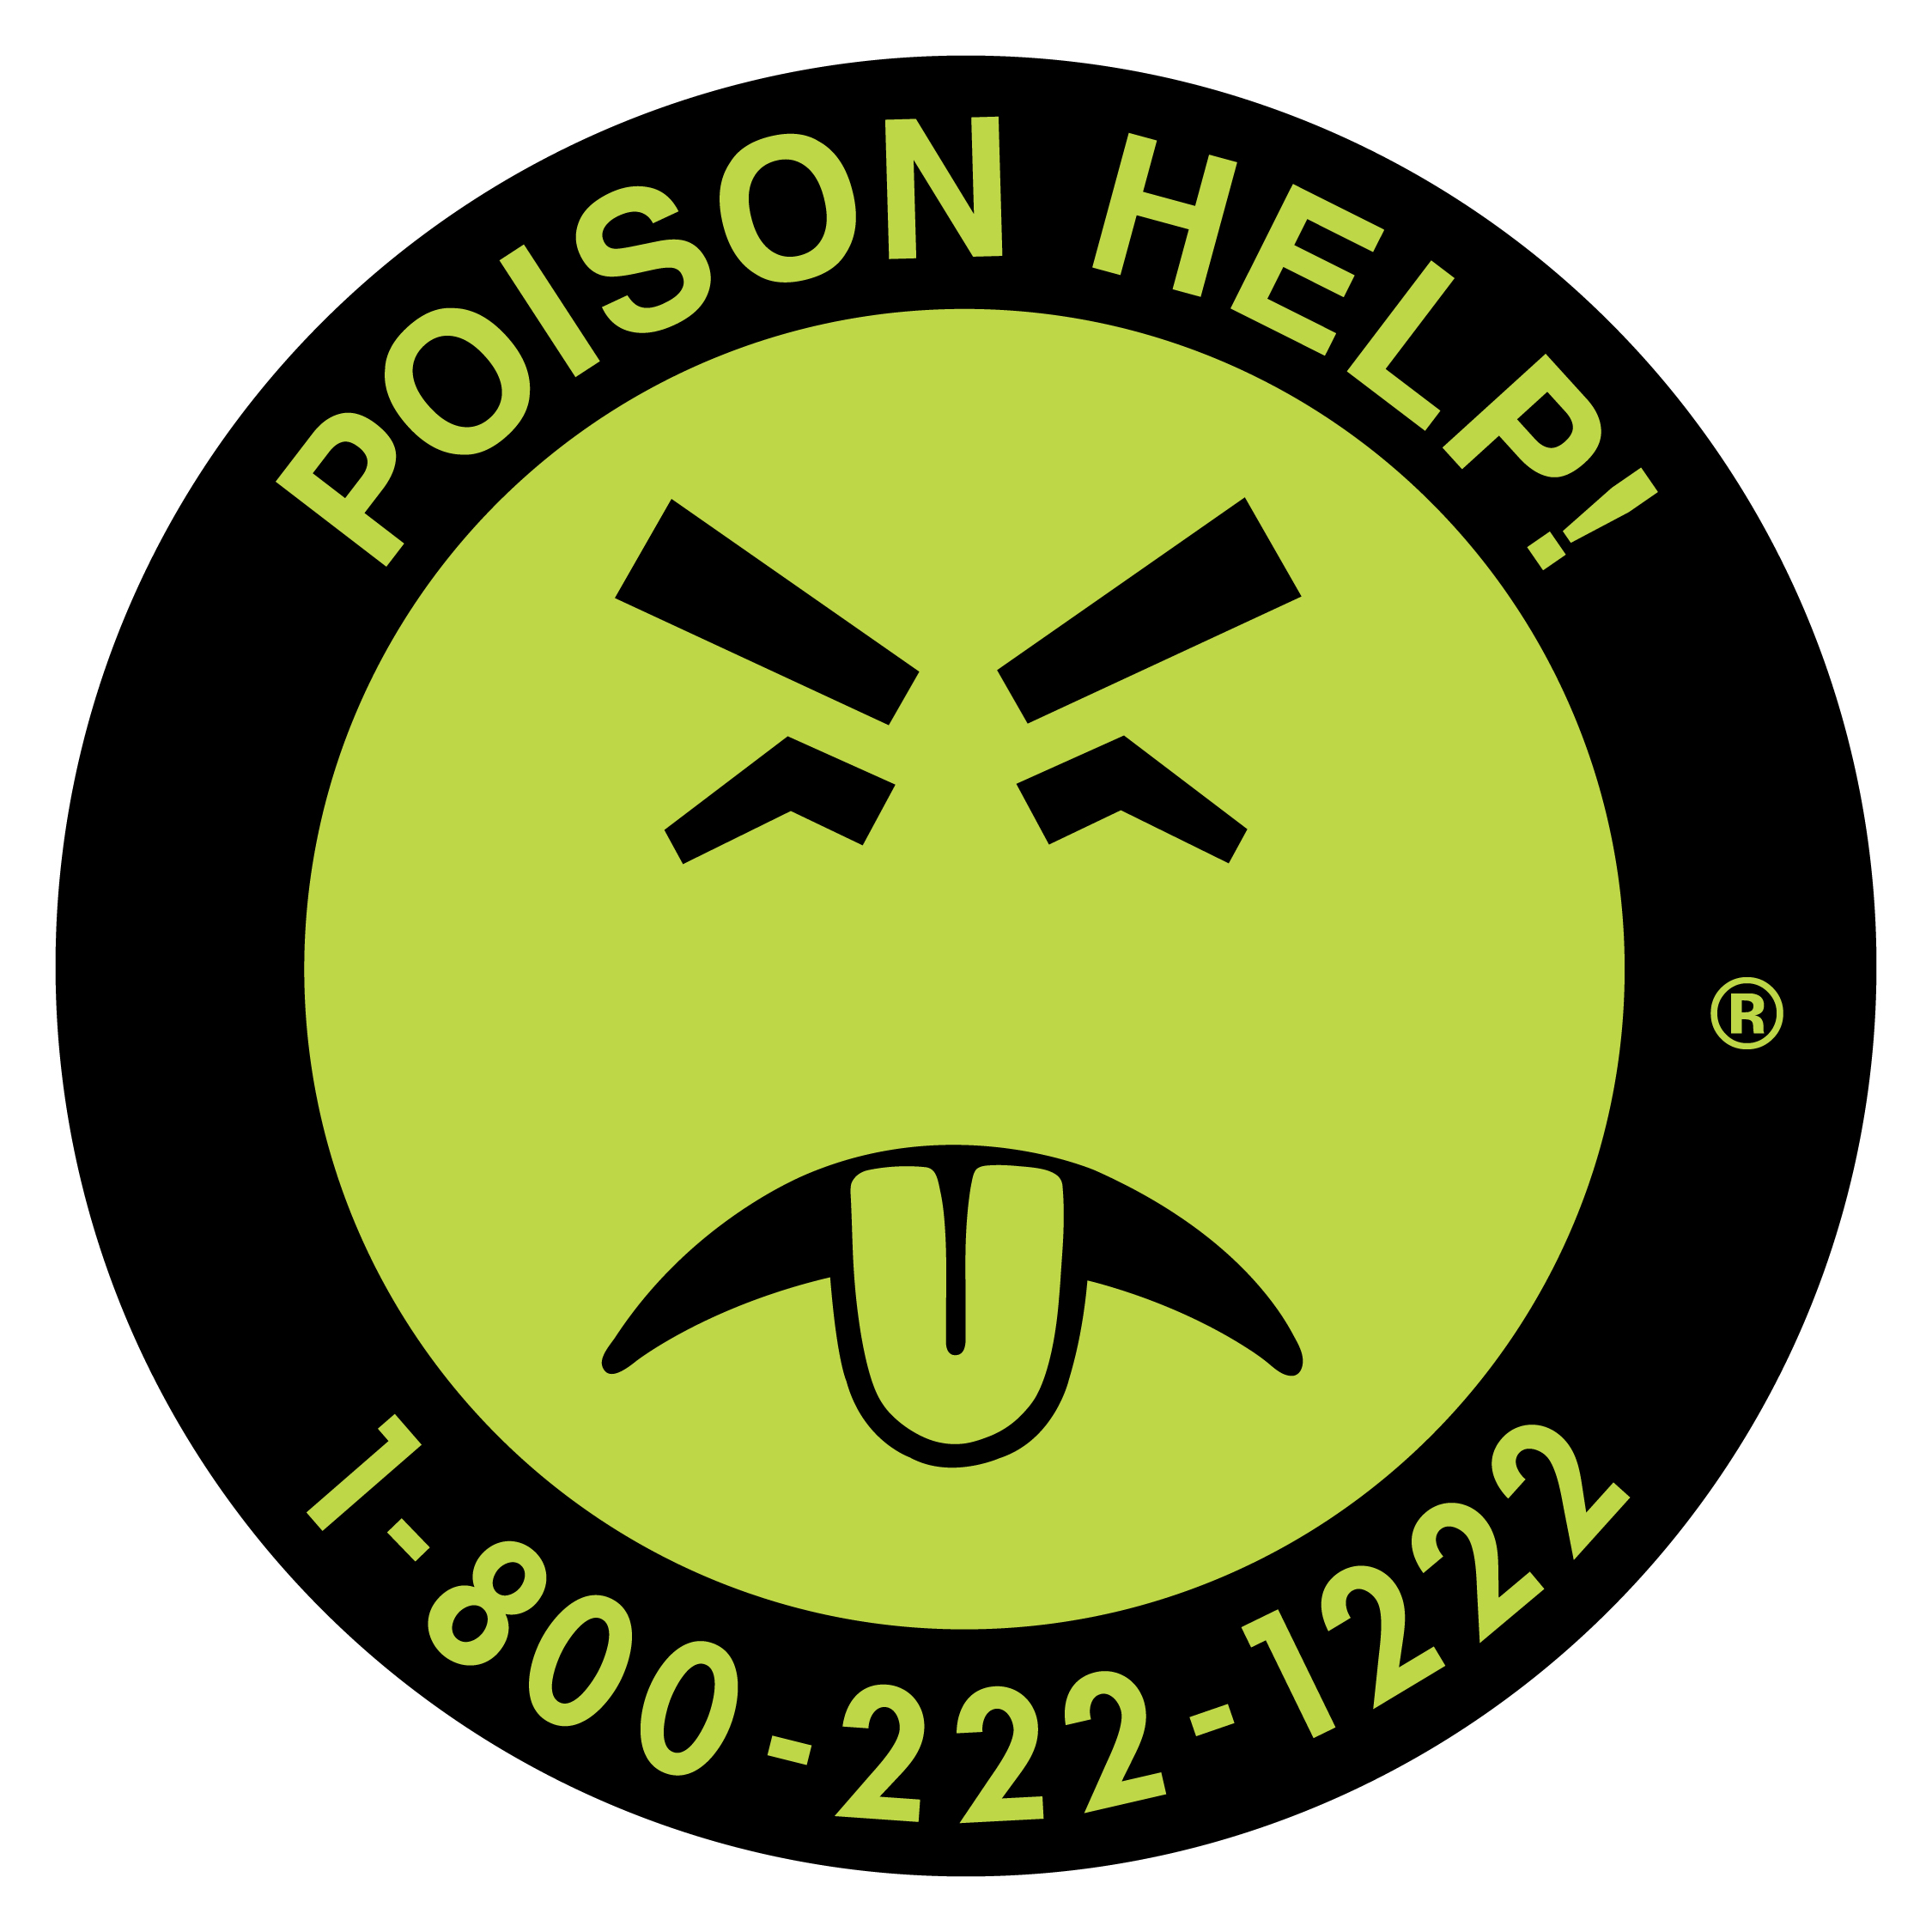 Circular graphic with a black outline and yellow-green center, the center featuring a graphic depiction of a face with grimacing eyes and tongue stuck out in disgust. In the outline is the text 